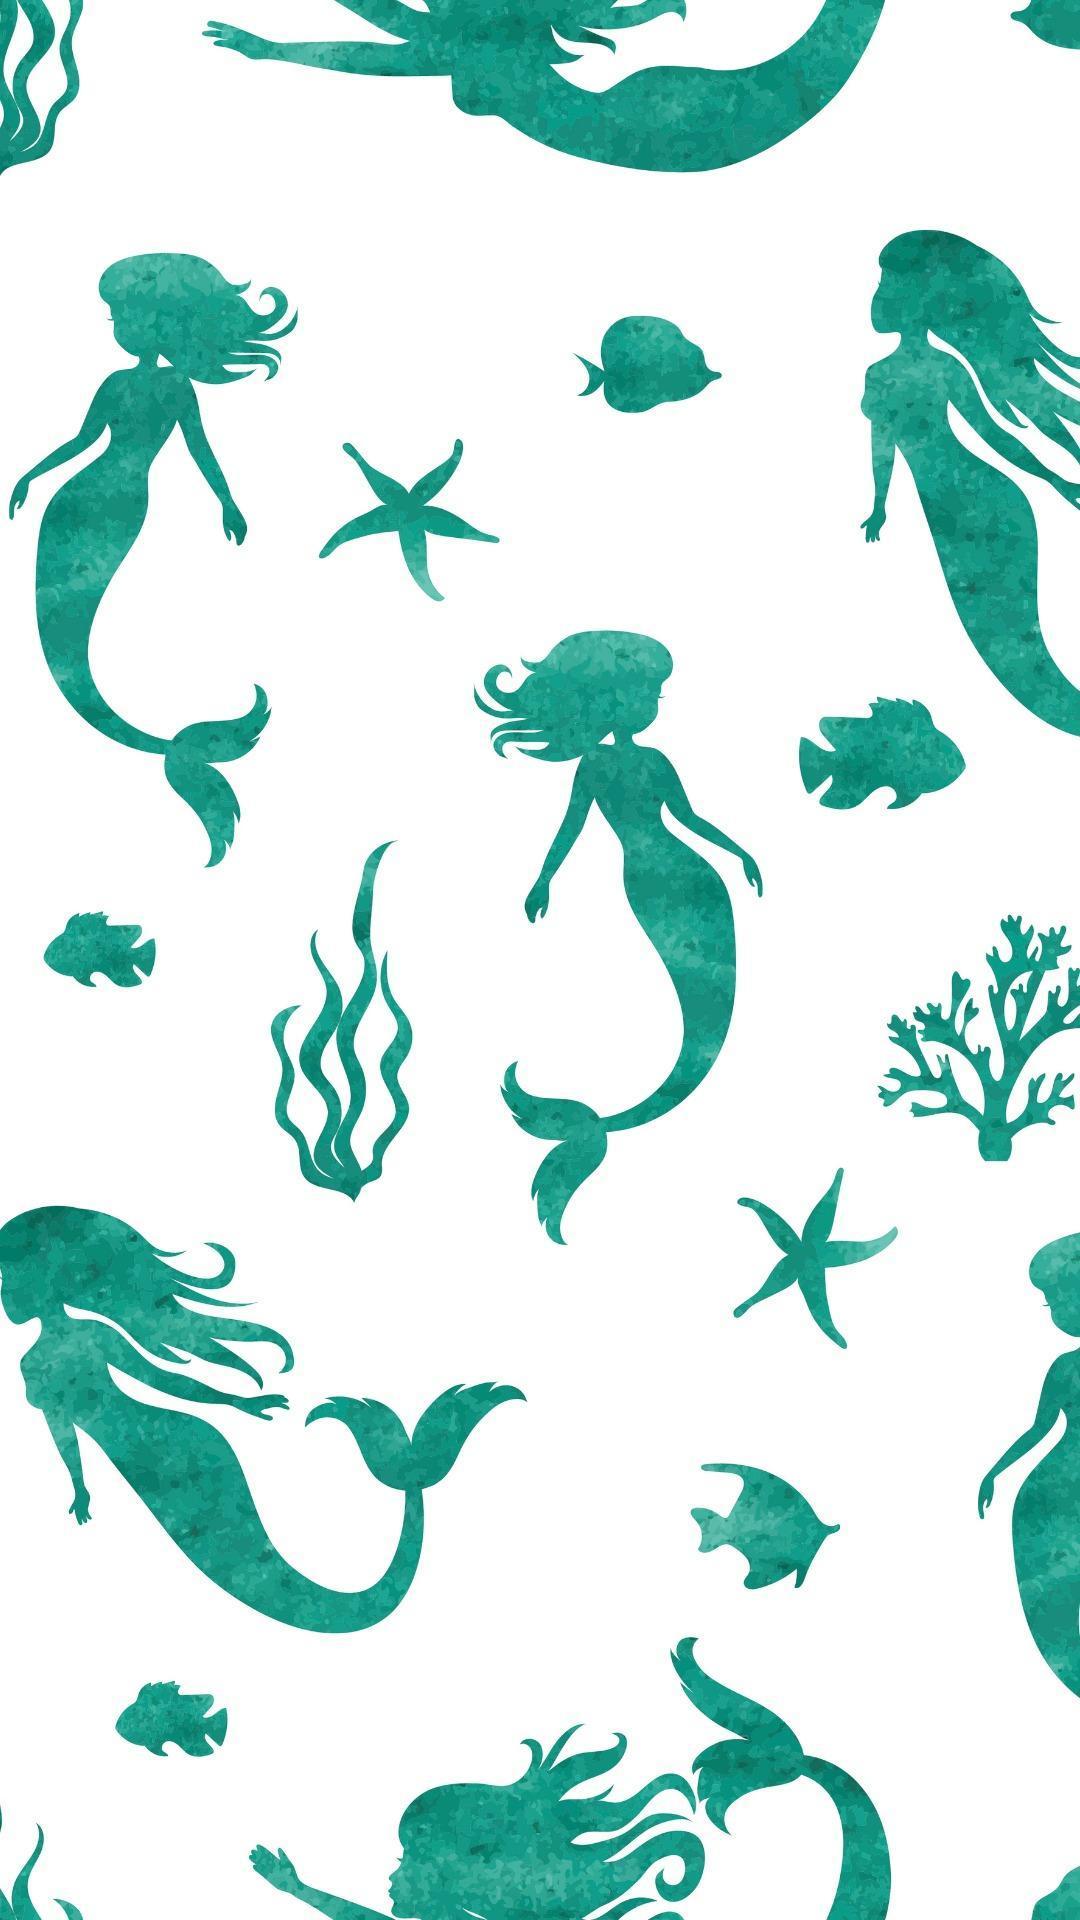 Cute Mermaid Wallpaper for Android